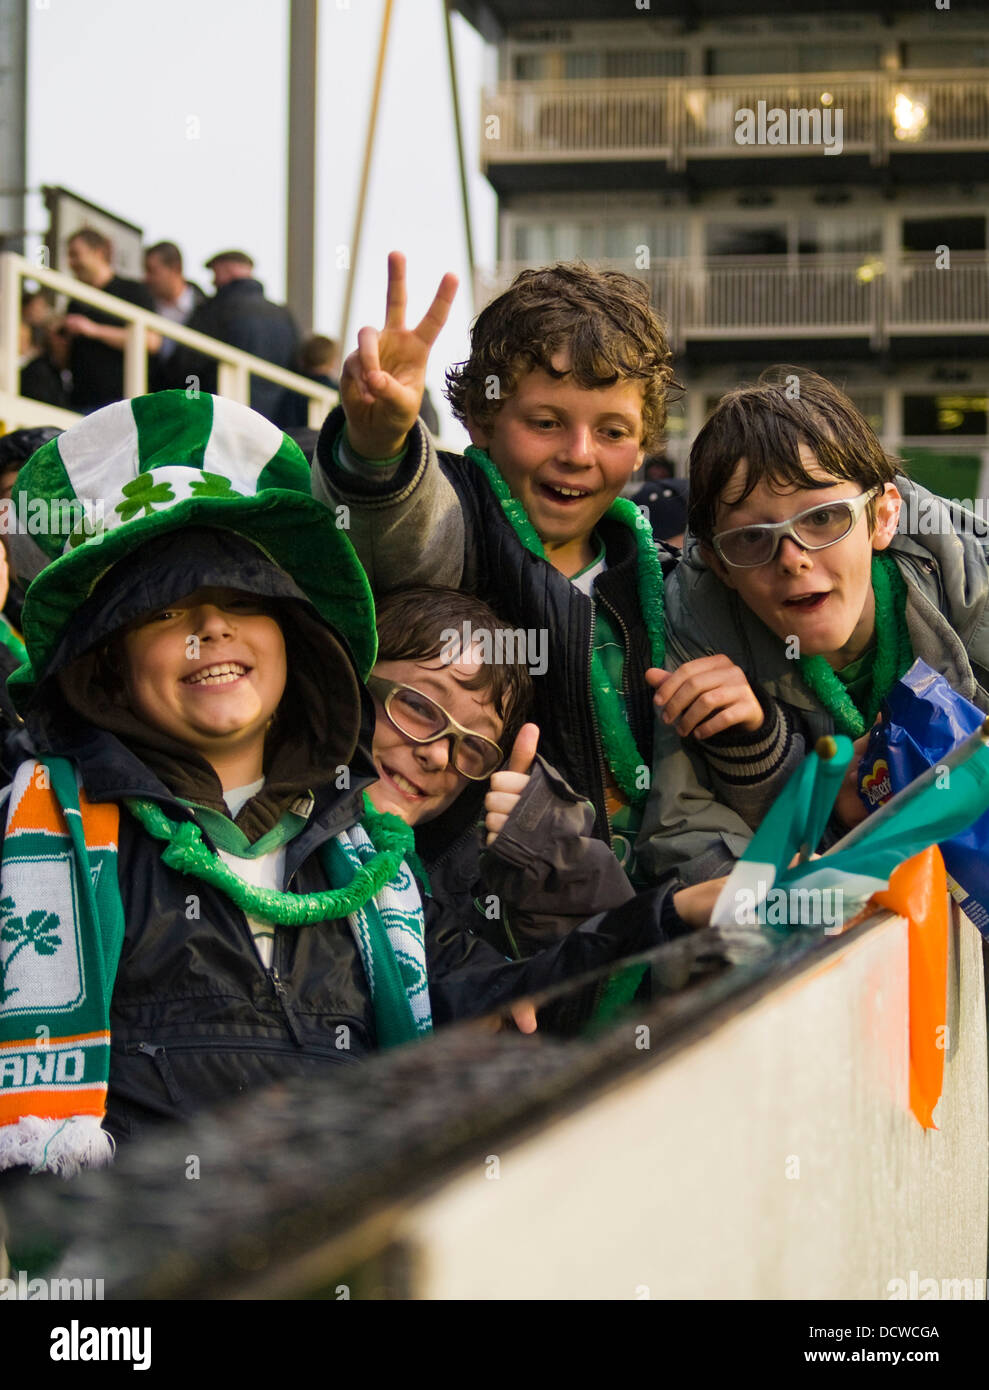 Young Irish footfall fans pose for the camera Stock Photo